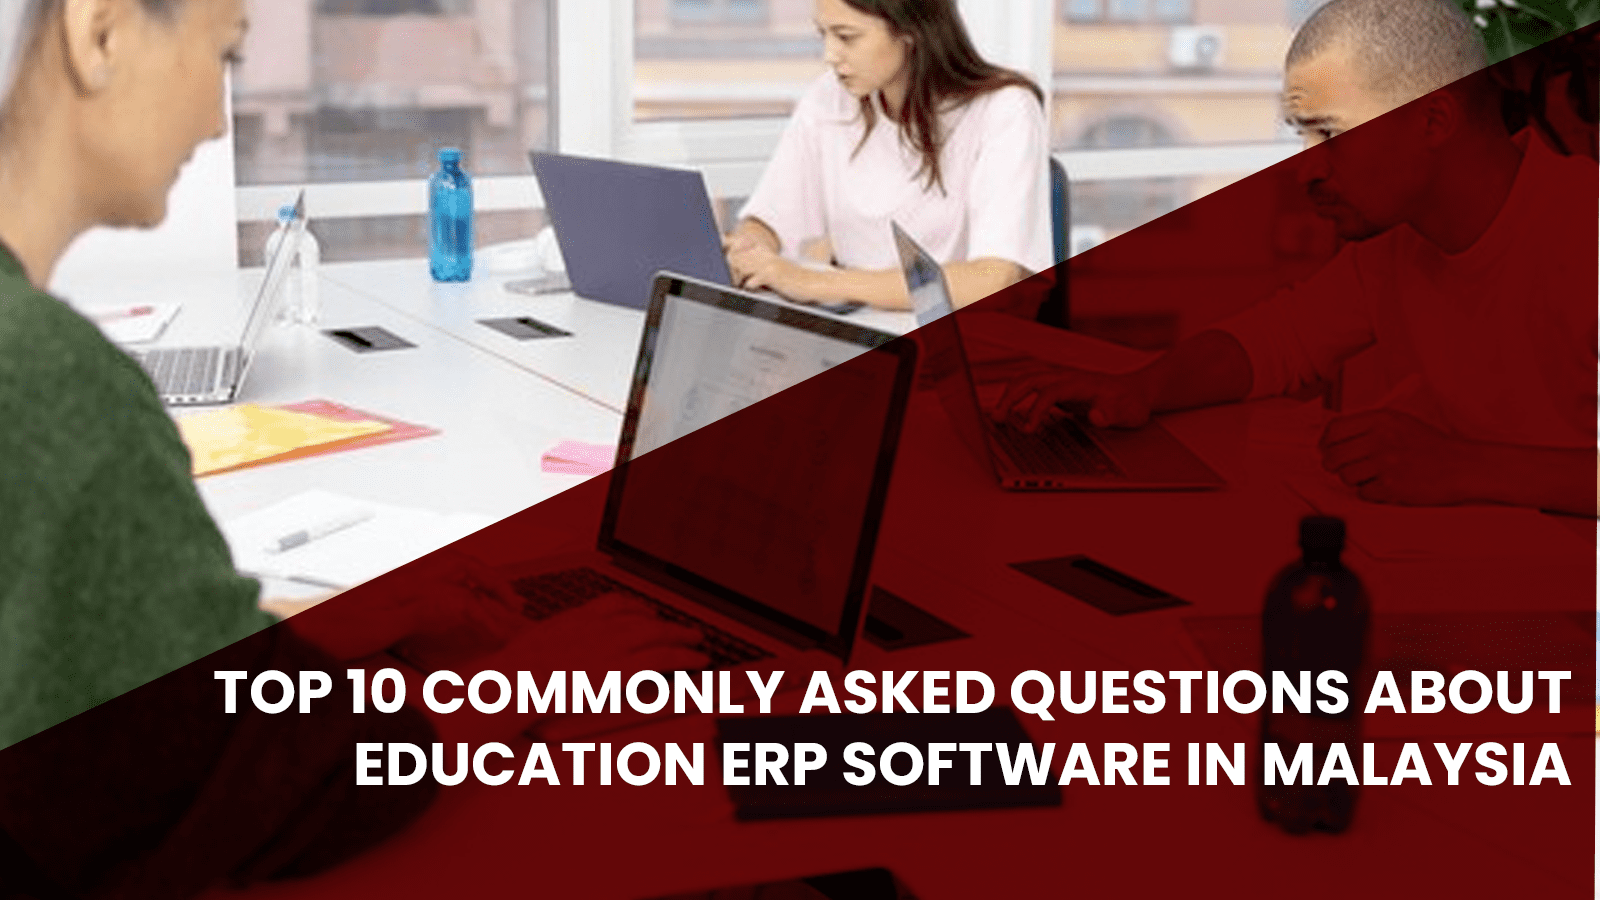 Education ERP Software in Malaysia